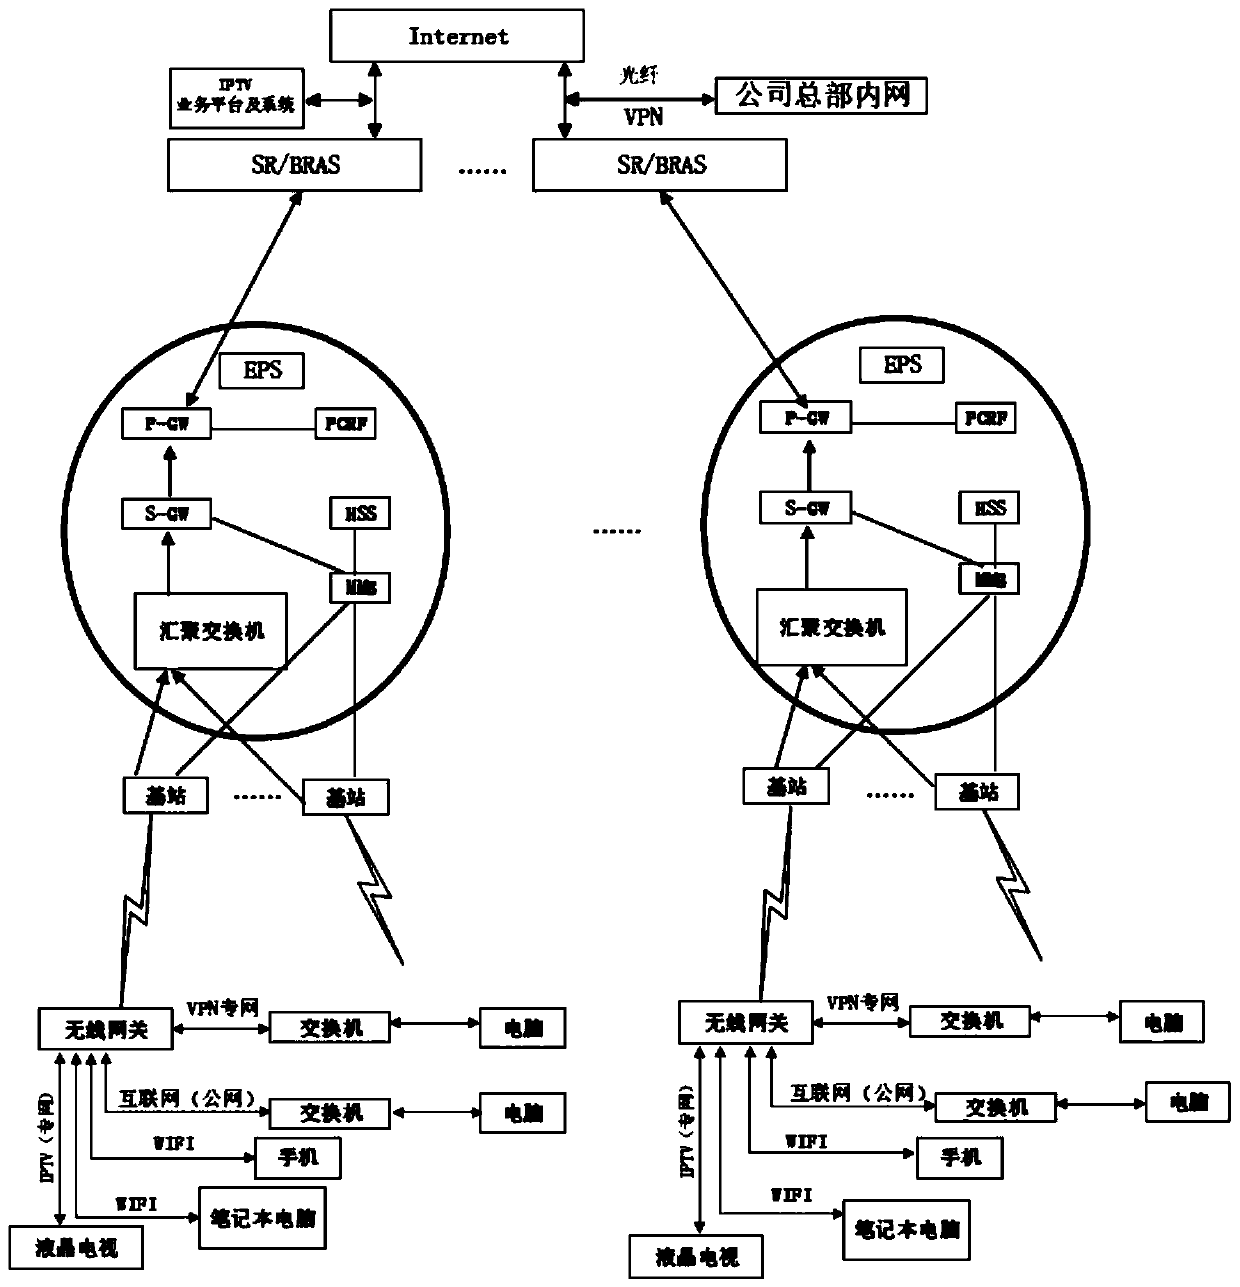 Internet and private network fusion transmission system based on wireless access mode